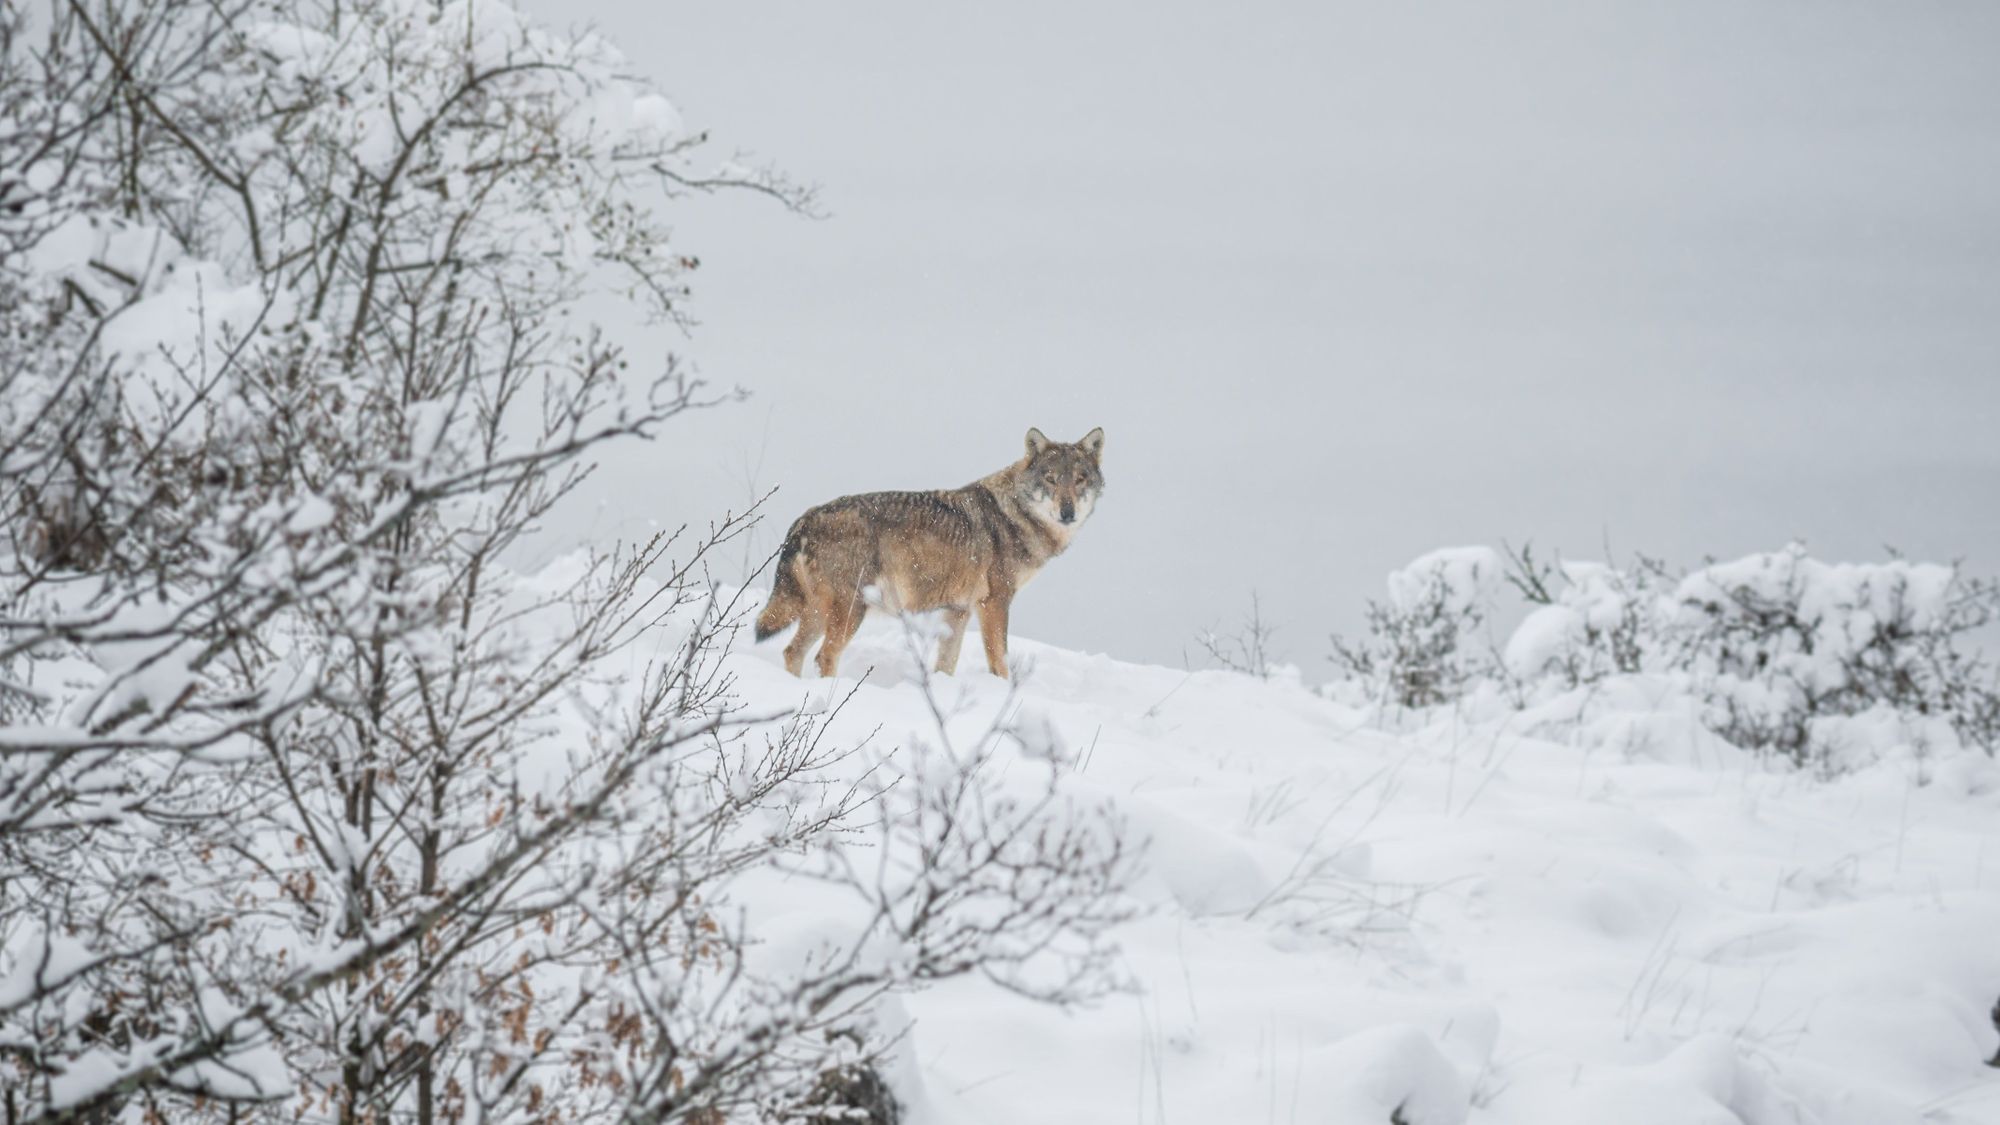 A stunning lone wolf looking out on the central Apennines of Italy. Photo: Getty